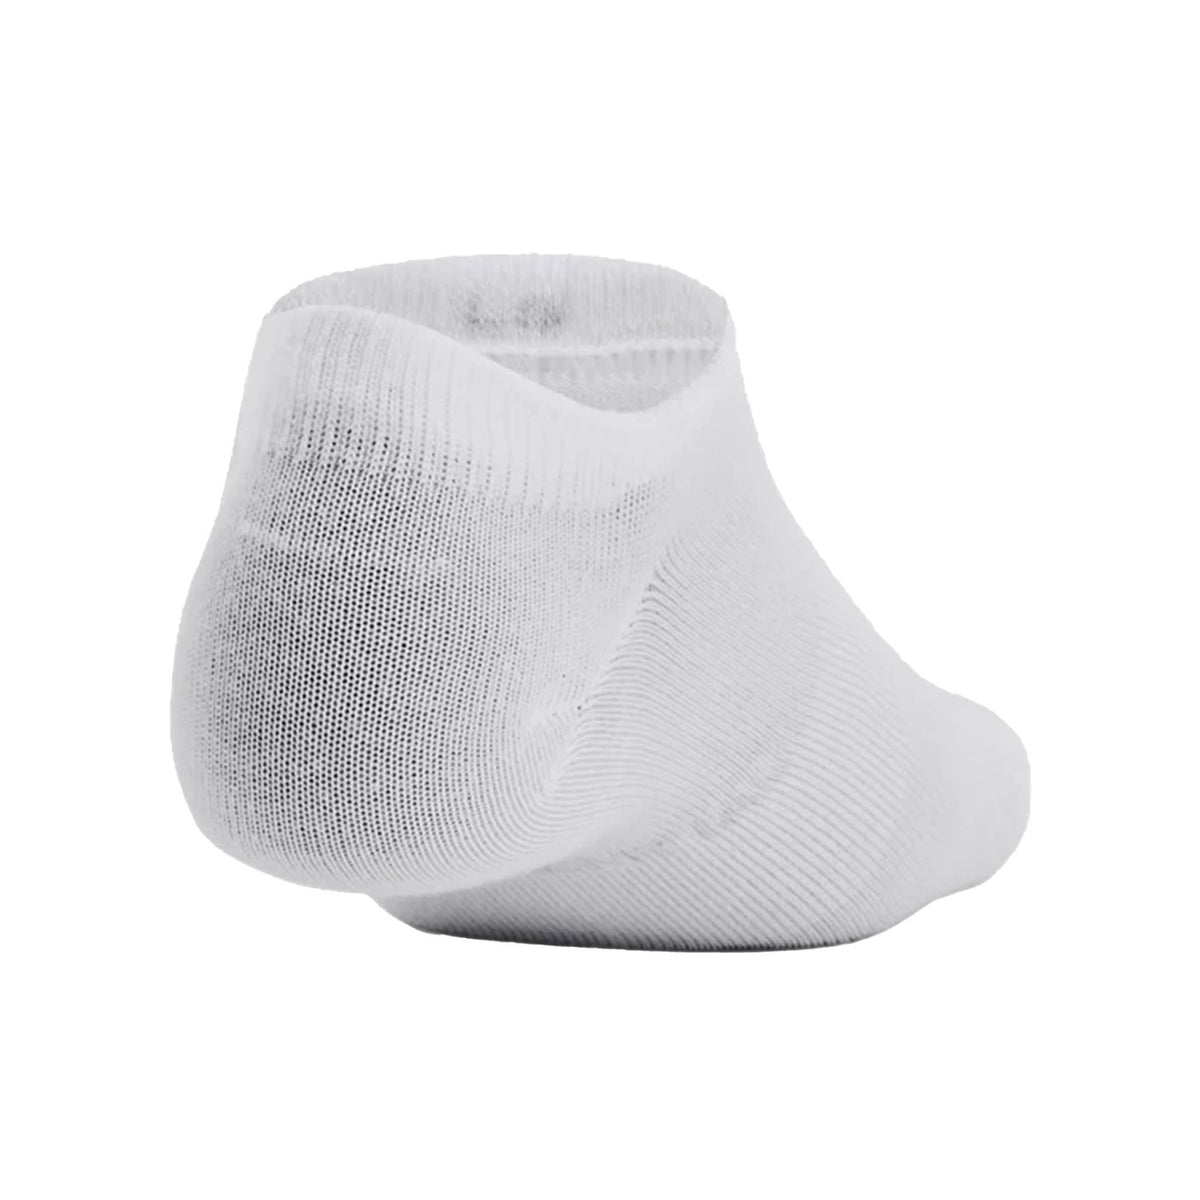 Under Armour No Show Socks 6 Pack: White